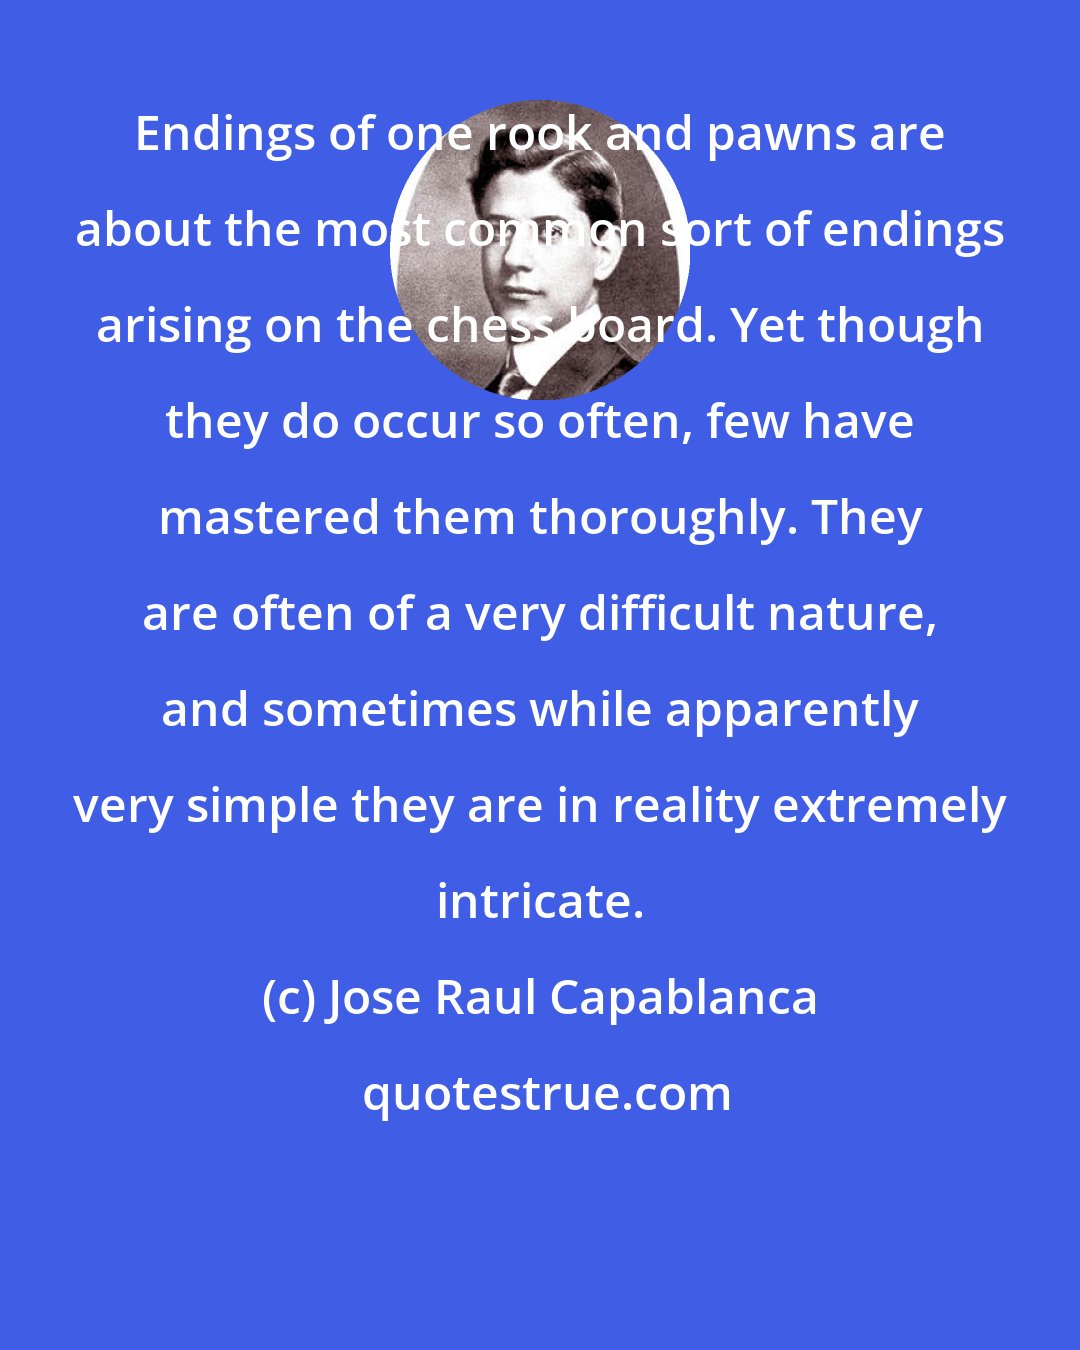 Jose Raul Capablanca: Endings of one rook and pawns are about the most common sort of endings arising on the chess board. Yet though they do occur so often, few have mastered them thoroughly. They are often of a very difficult nature, and sometimes while apparently very simple they are in reality extremely intricate.